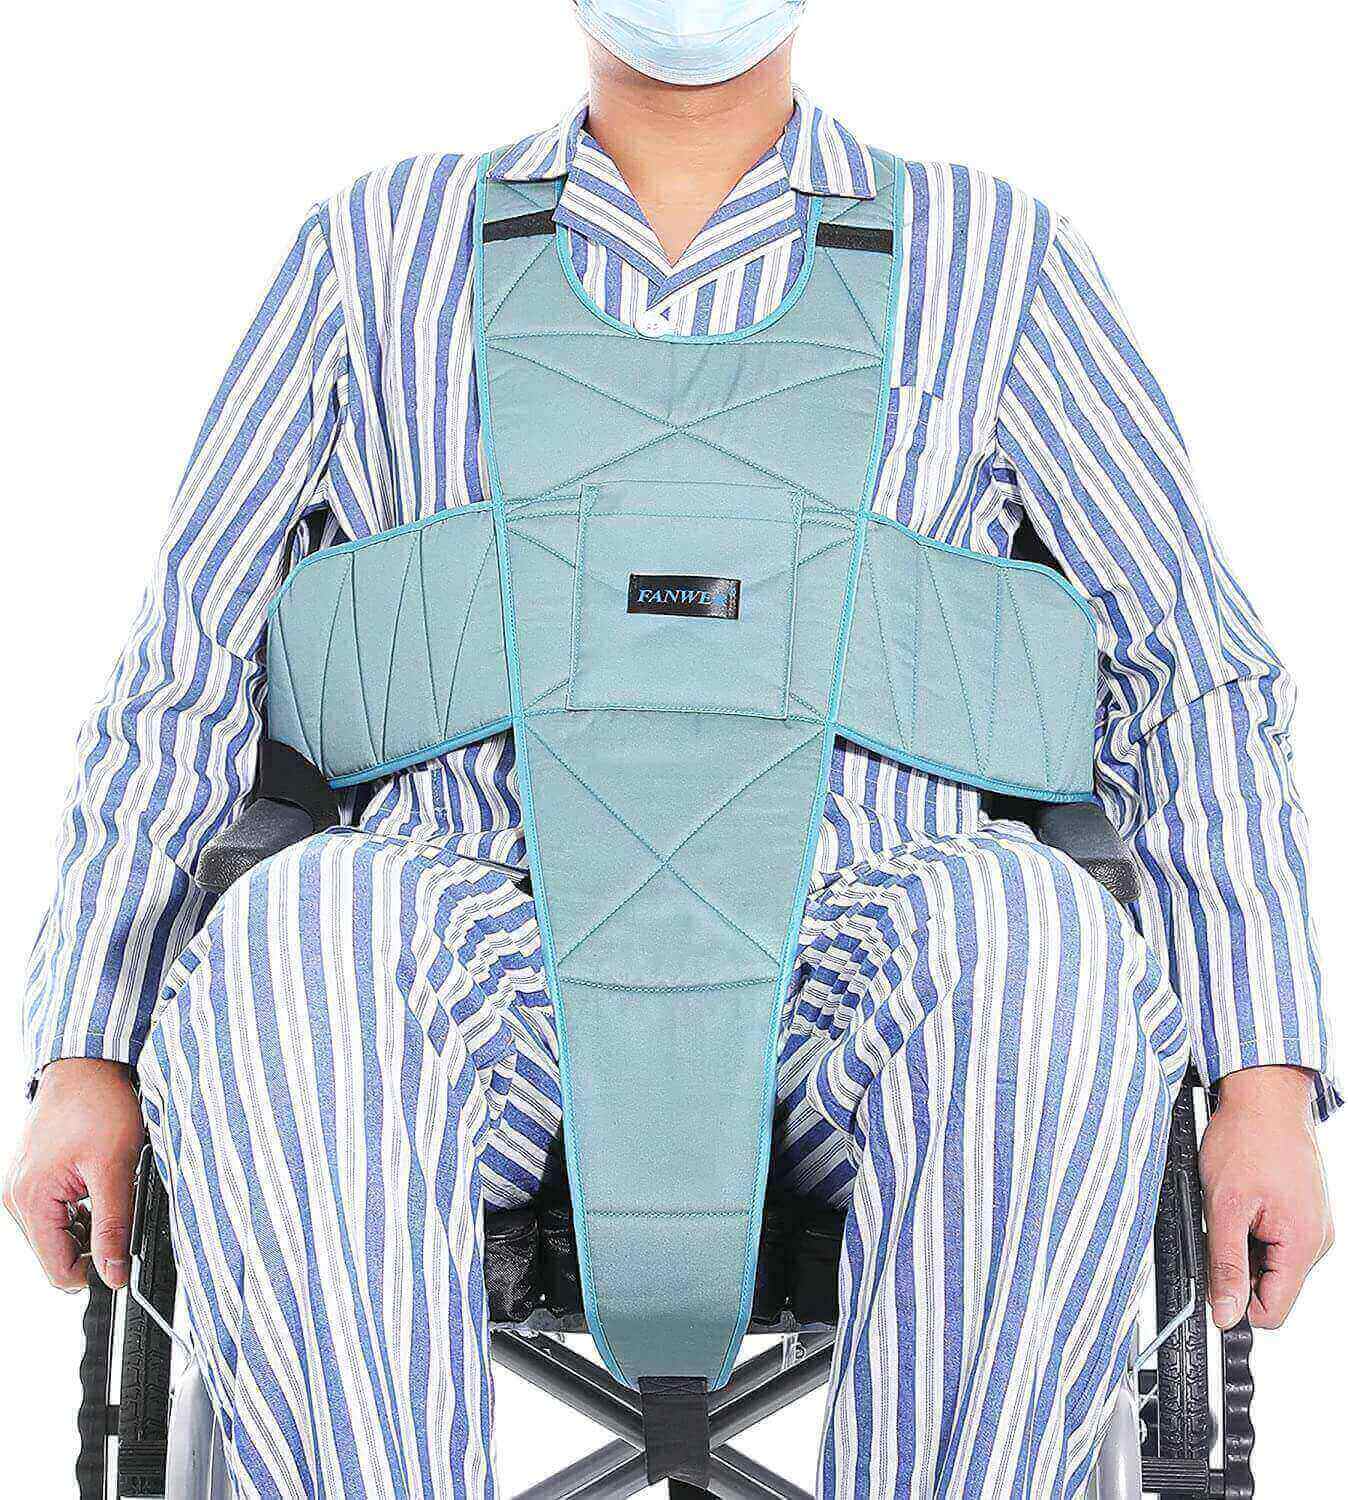 Fanwer wheelchair seat belt restraints with metal buckle guard, feature image